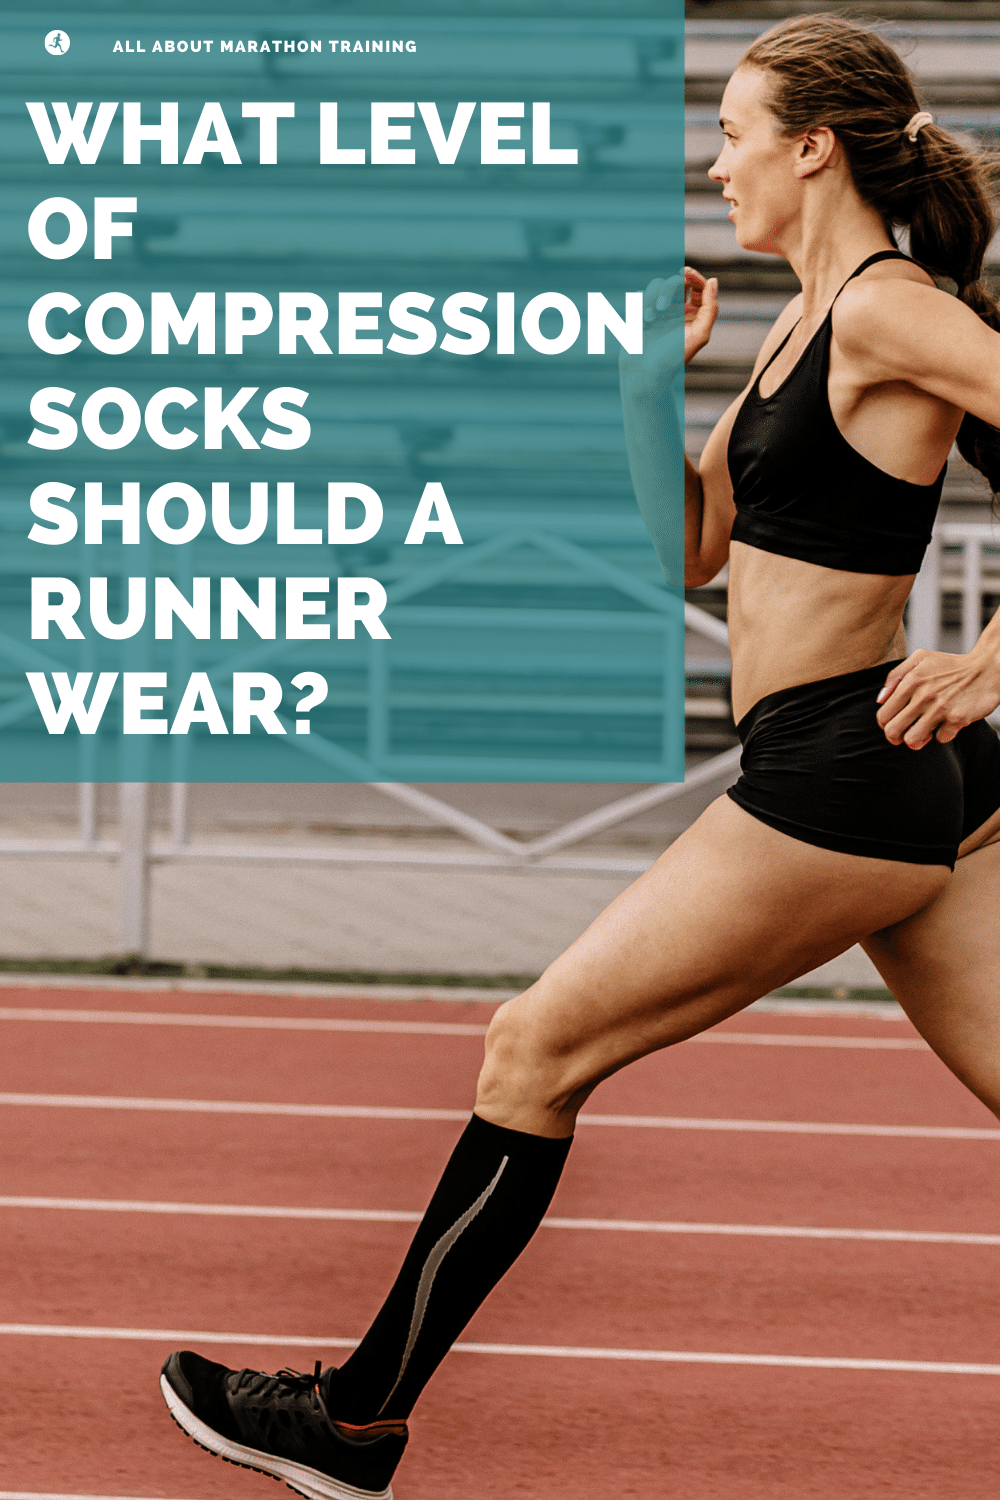 What are the Benefits of Compression Socks?